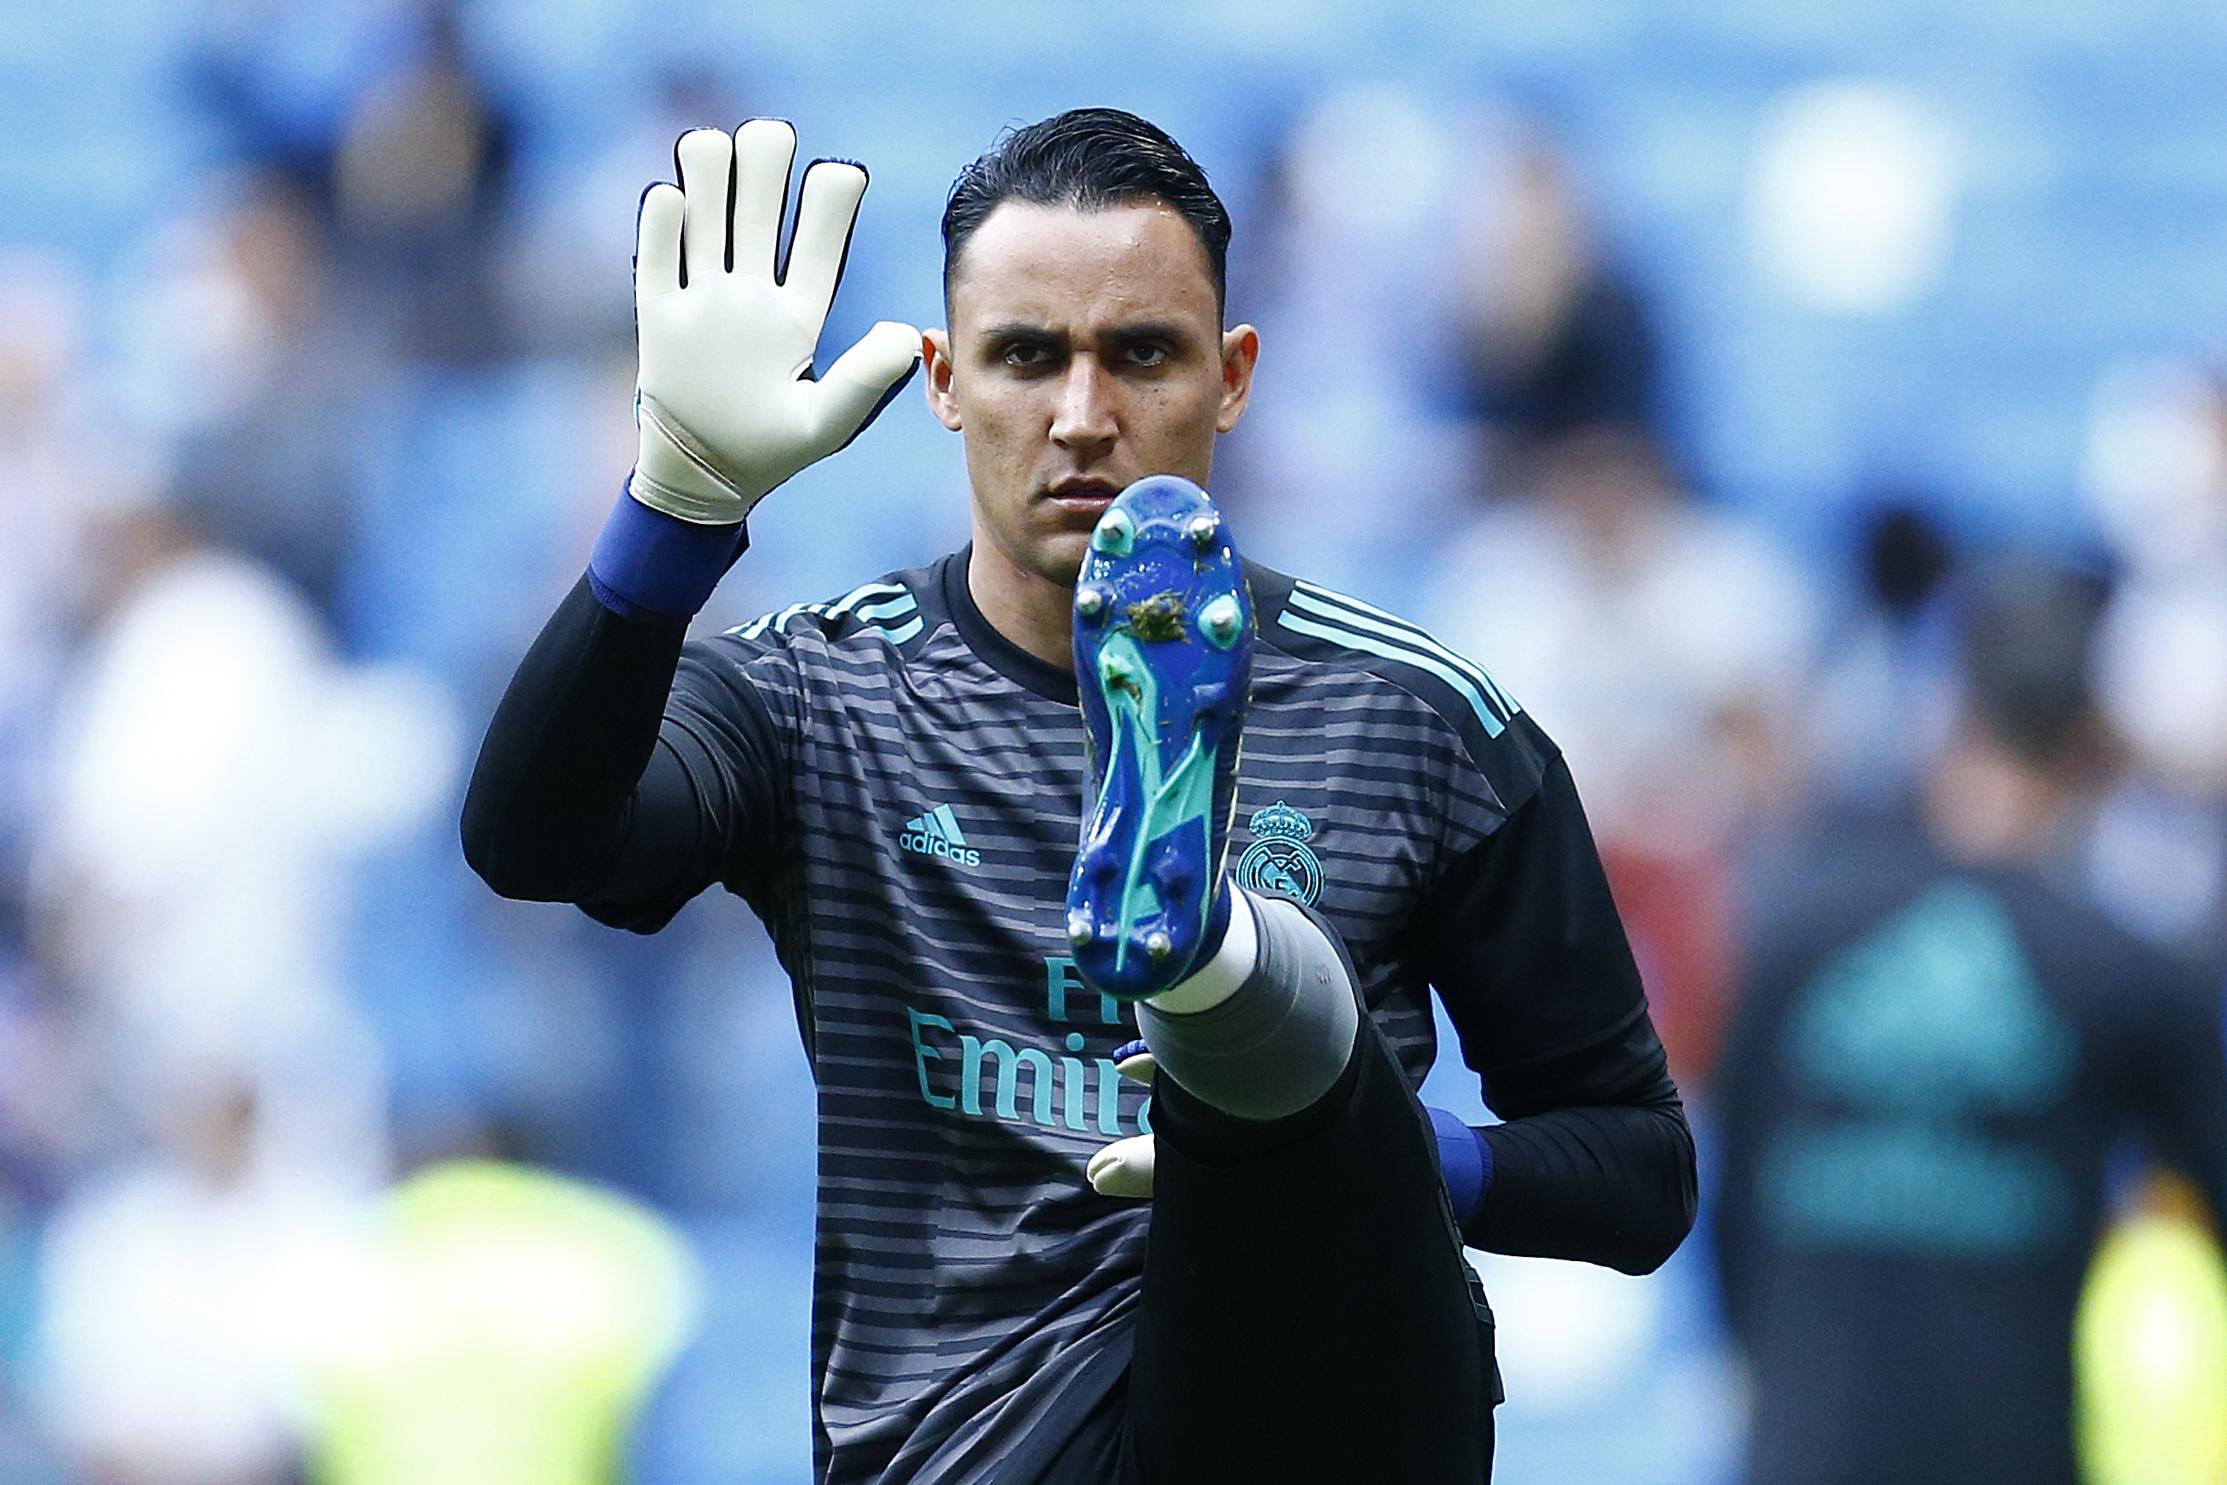 Real Madrid's Navas will need to be at his best